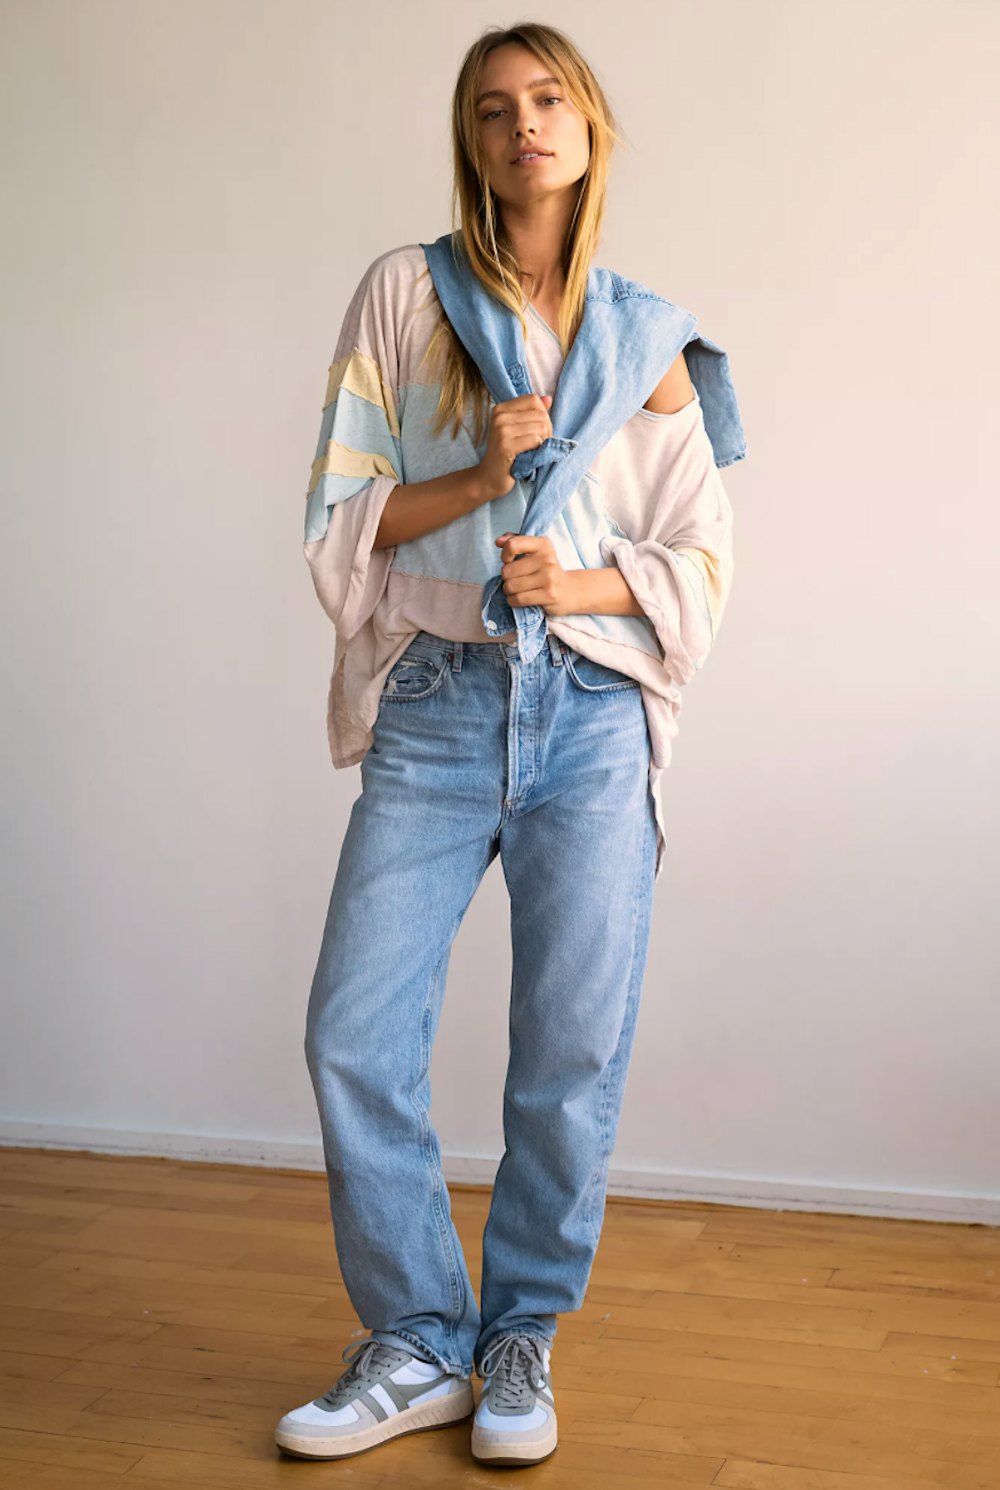 The Baggy Jean Is The Next '90s Trend You Need In Your Spring Closet